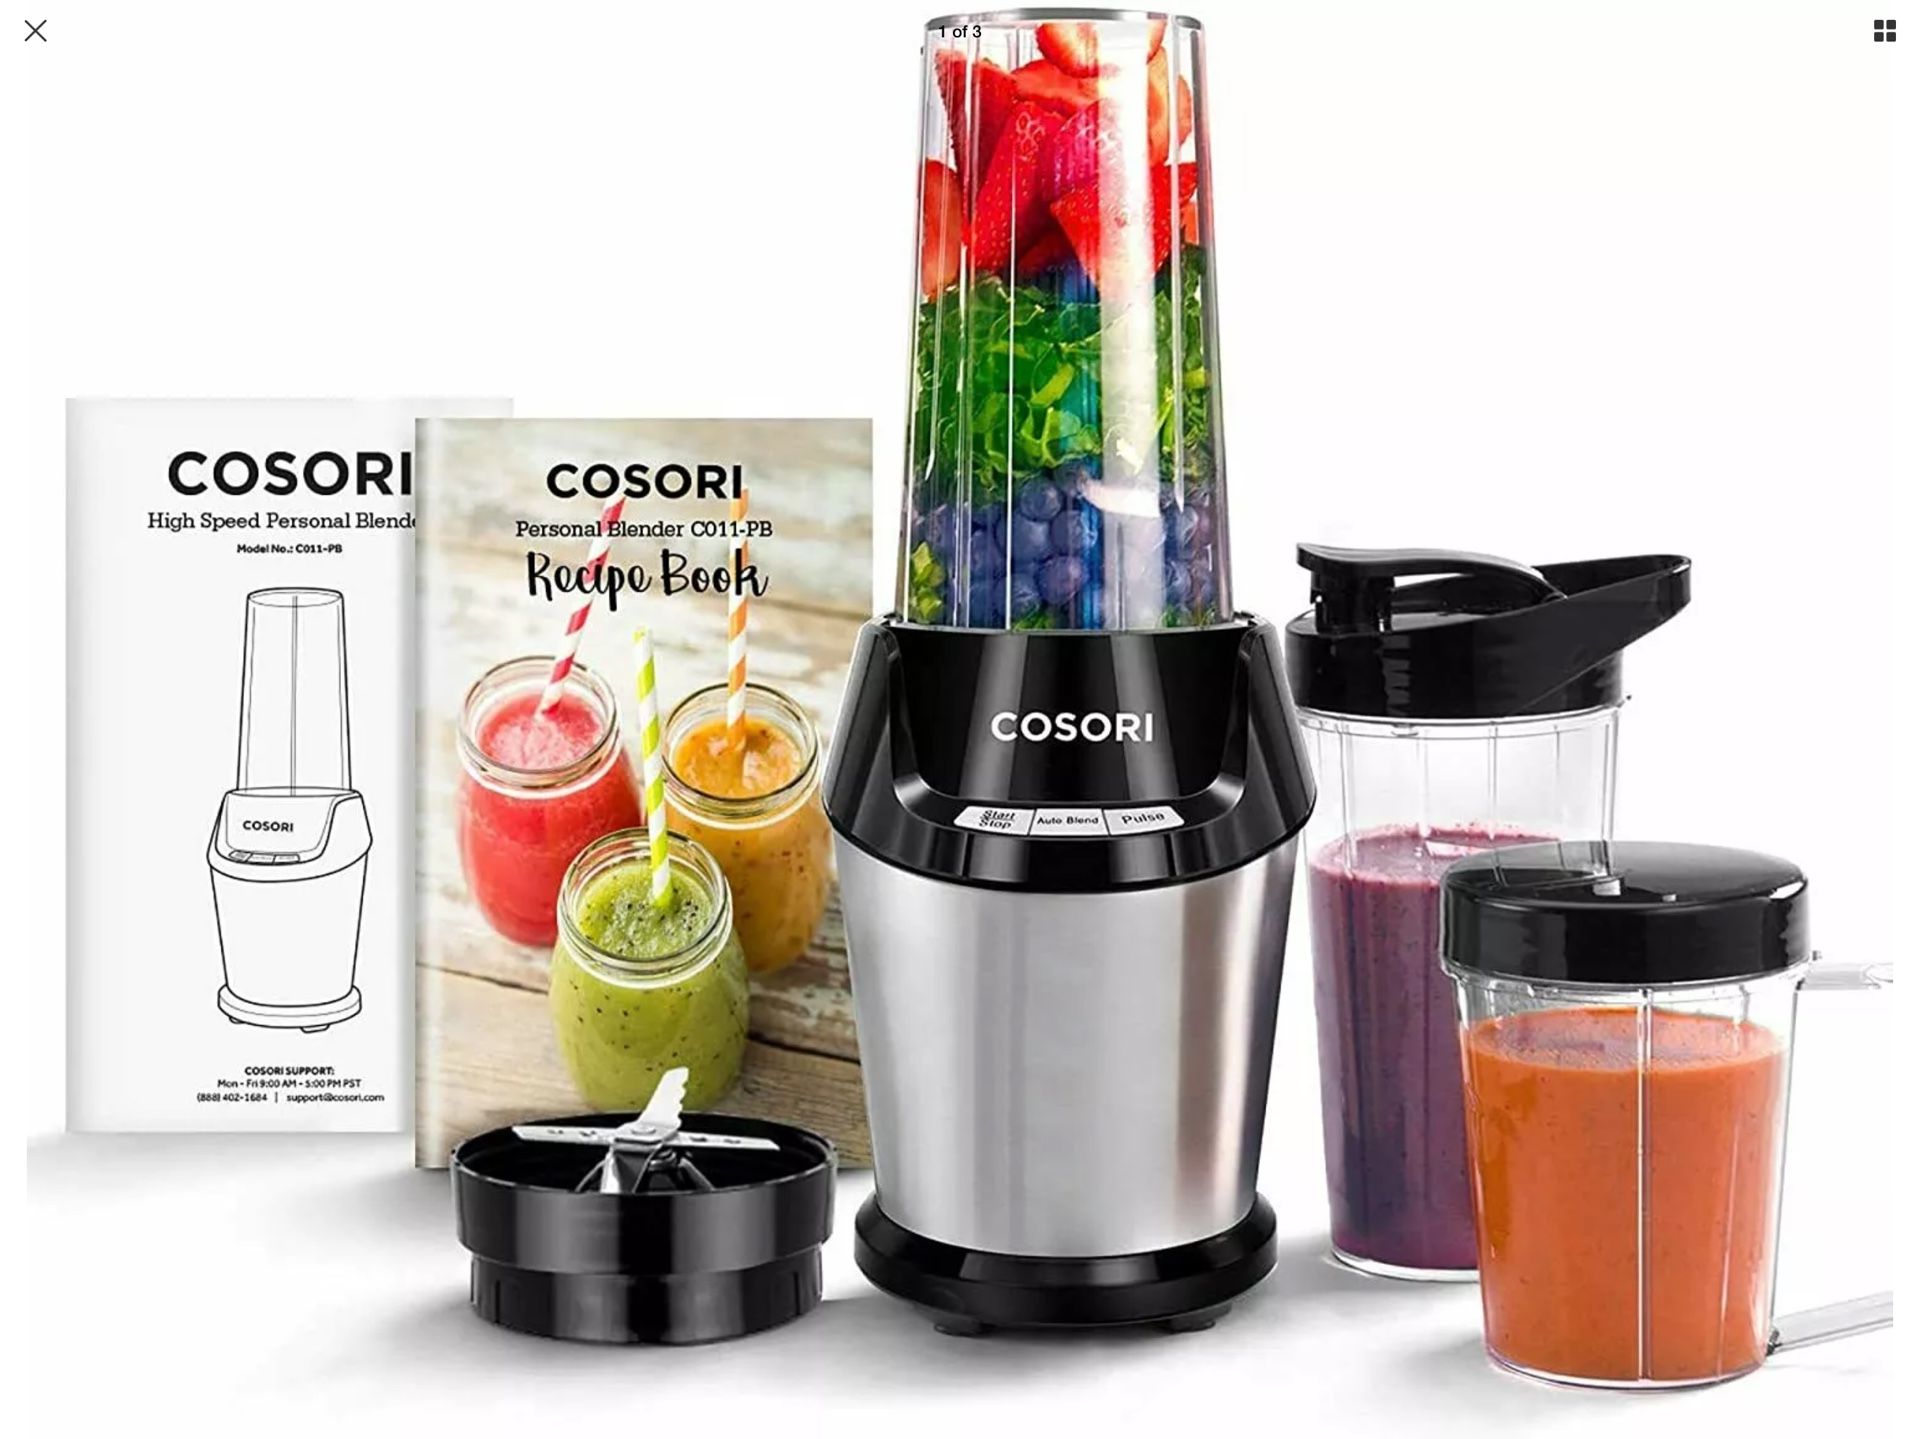 Personal blender brand new in a box